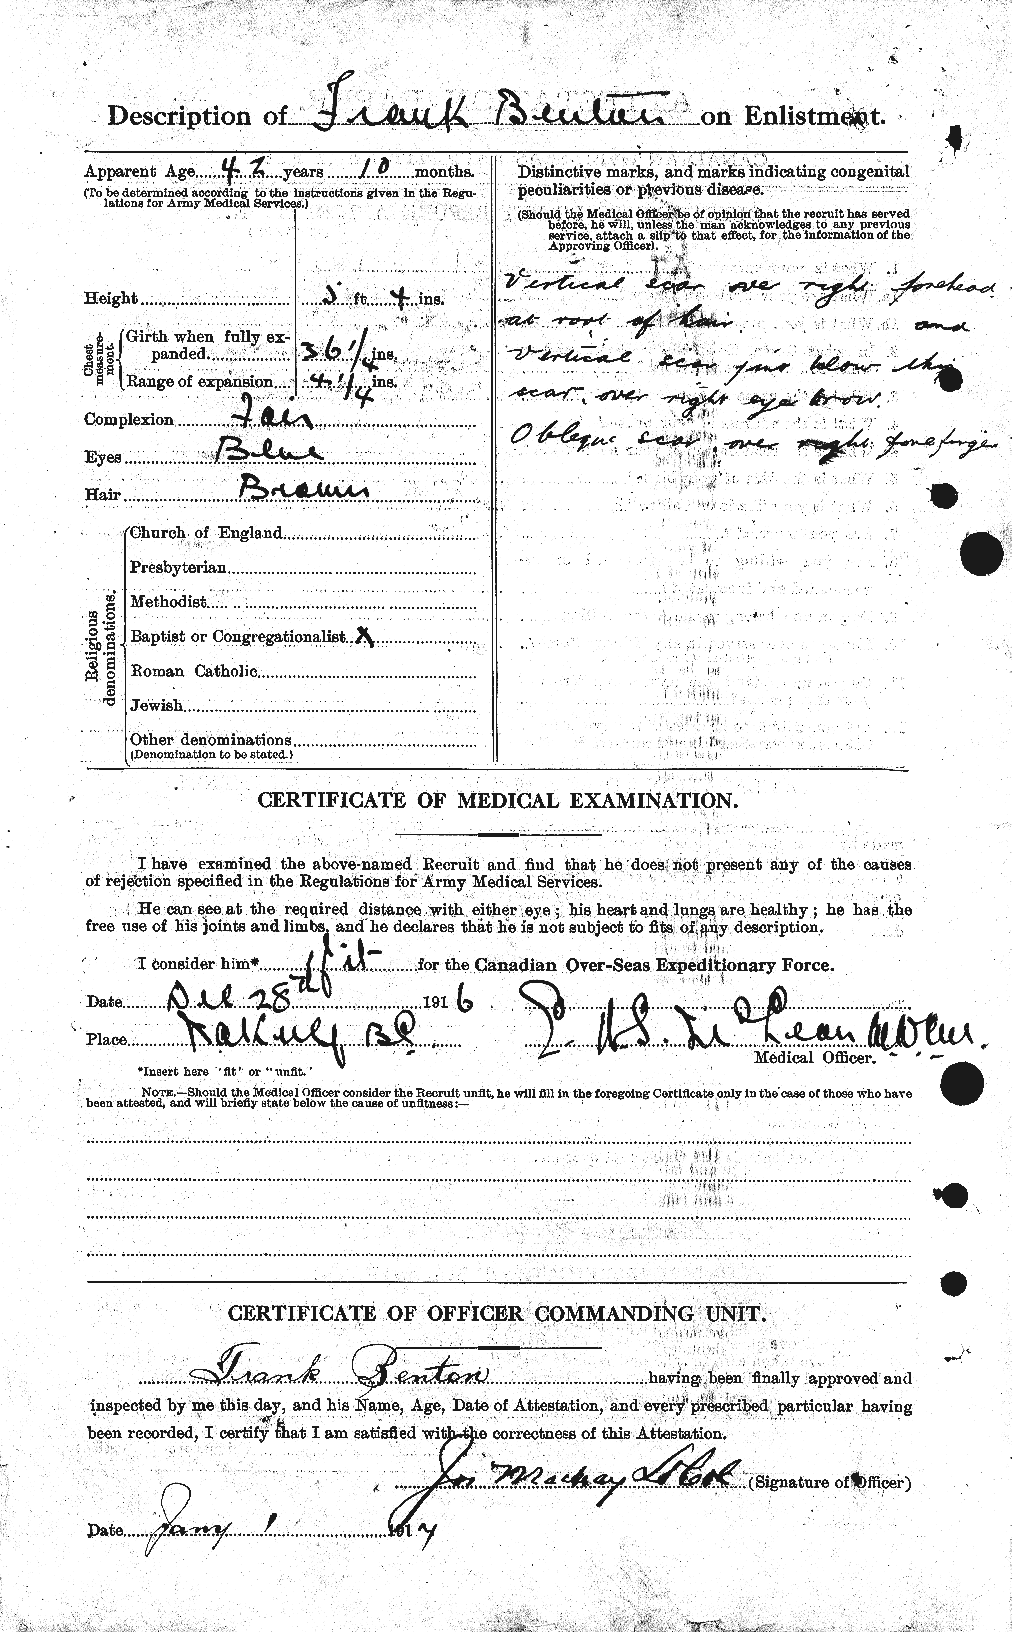 Personnel Records of the First World War - CEF 237810b